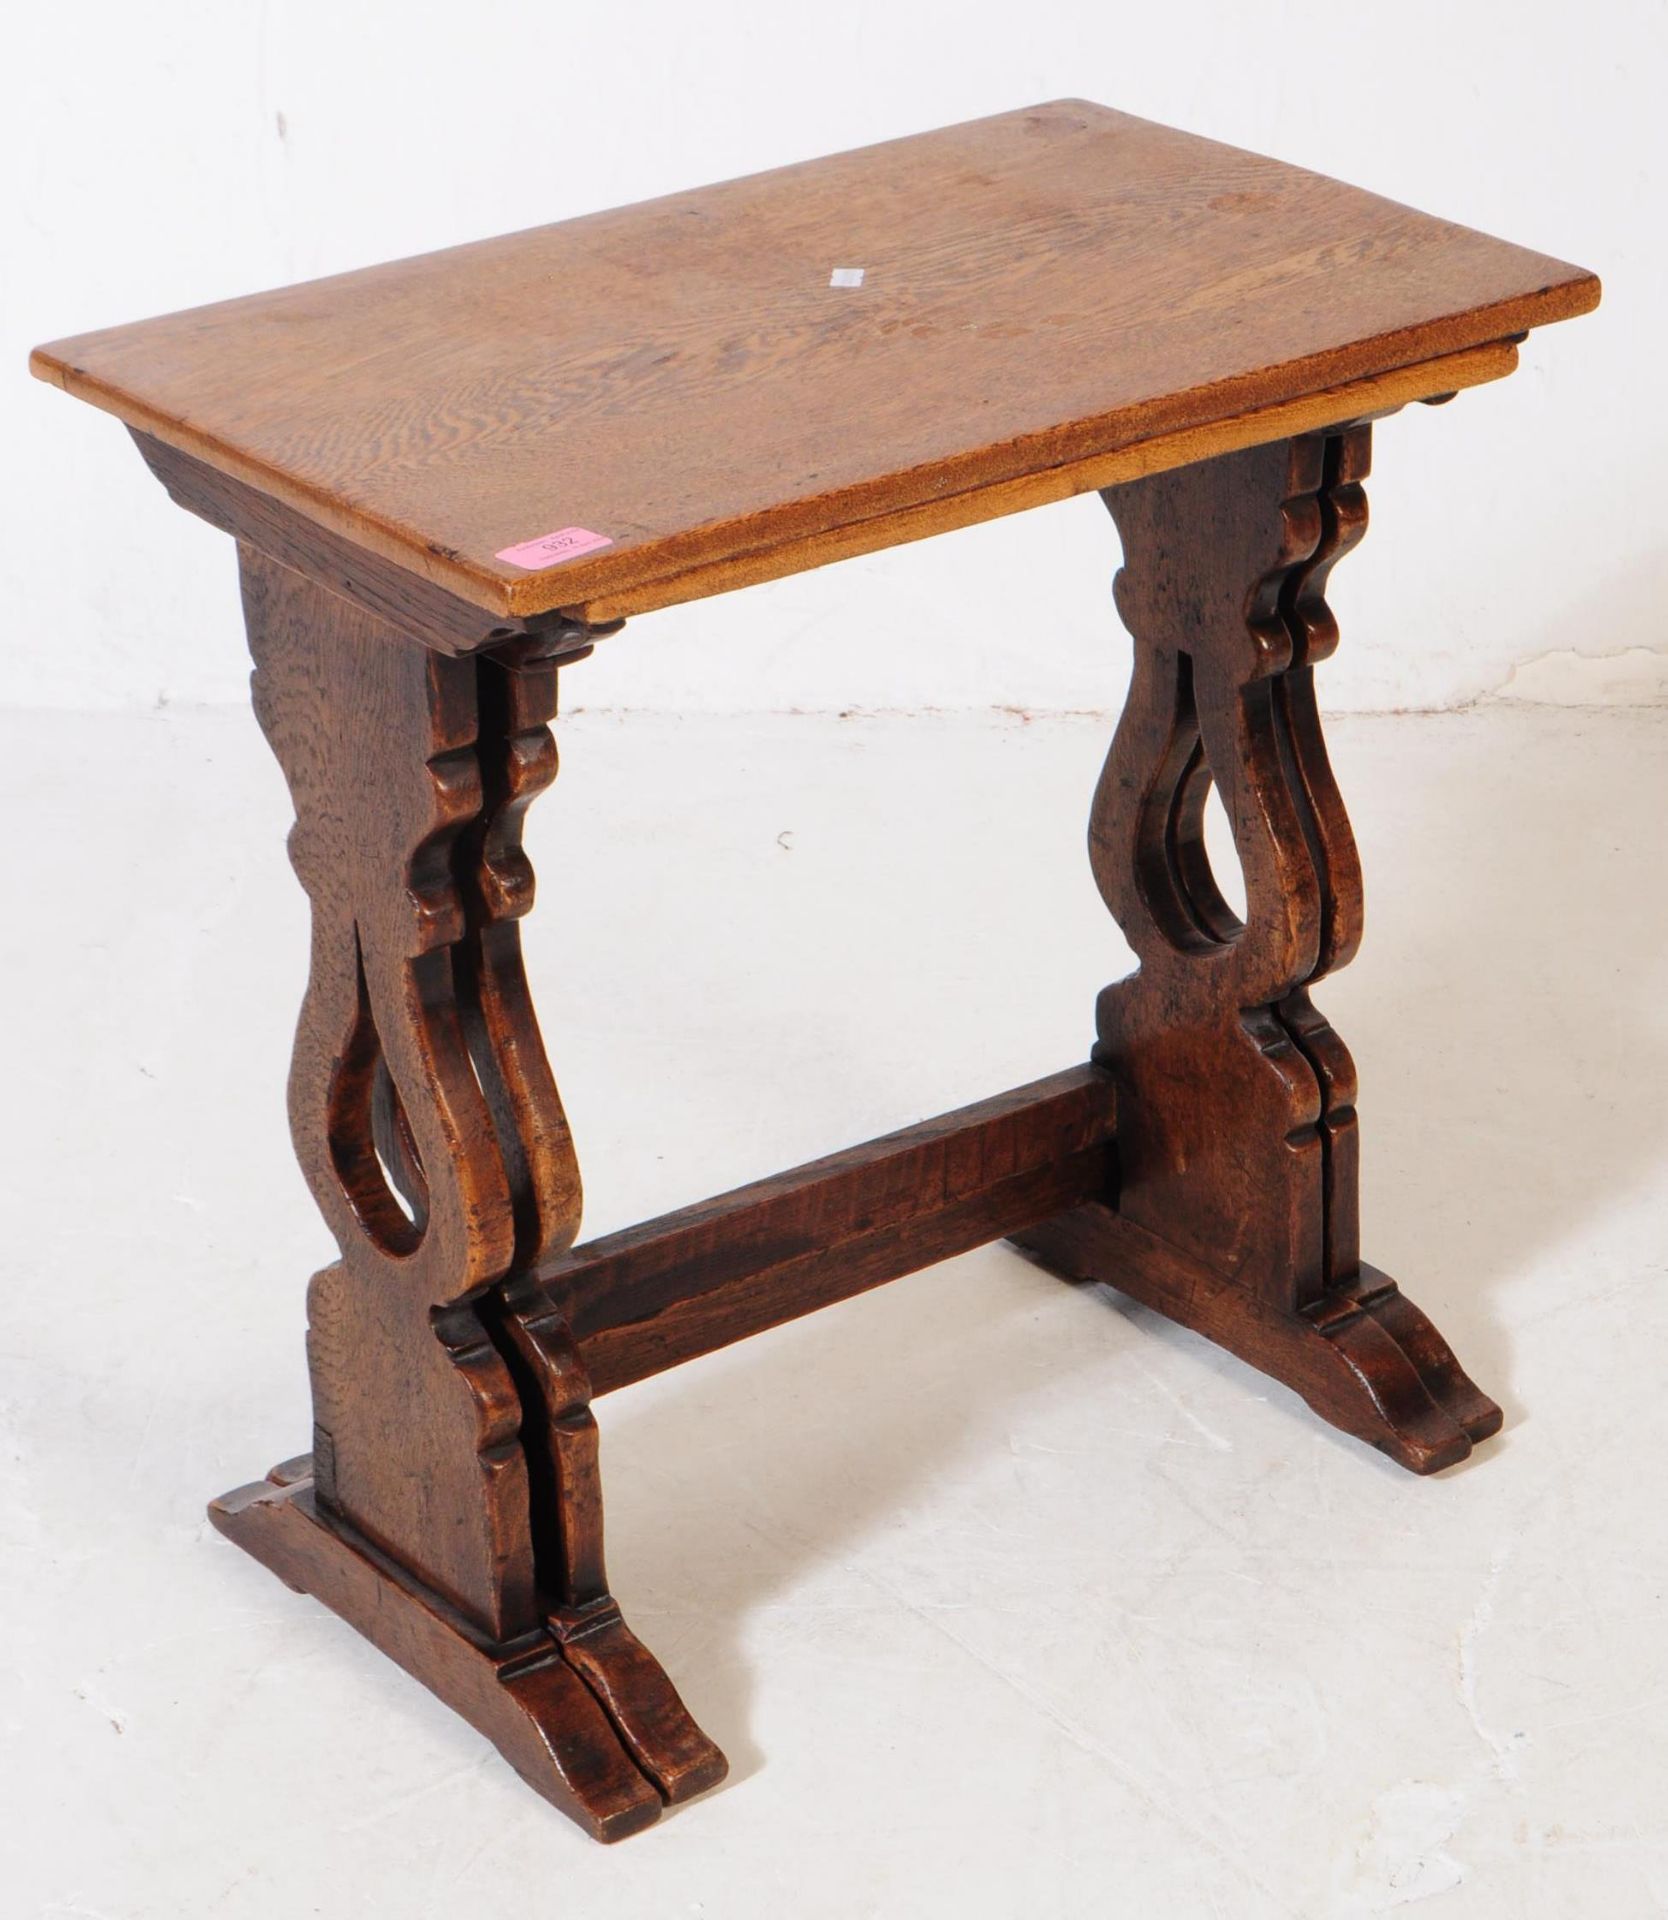 EARLY 20TH CENTURY OAK WOOD NESTING TABLES